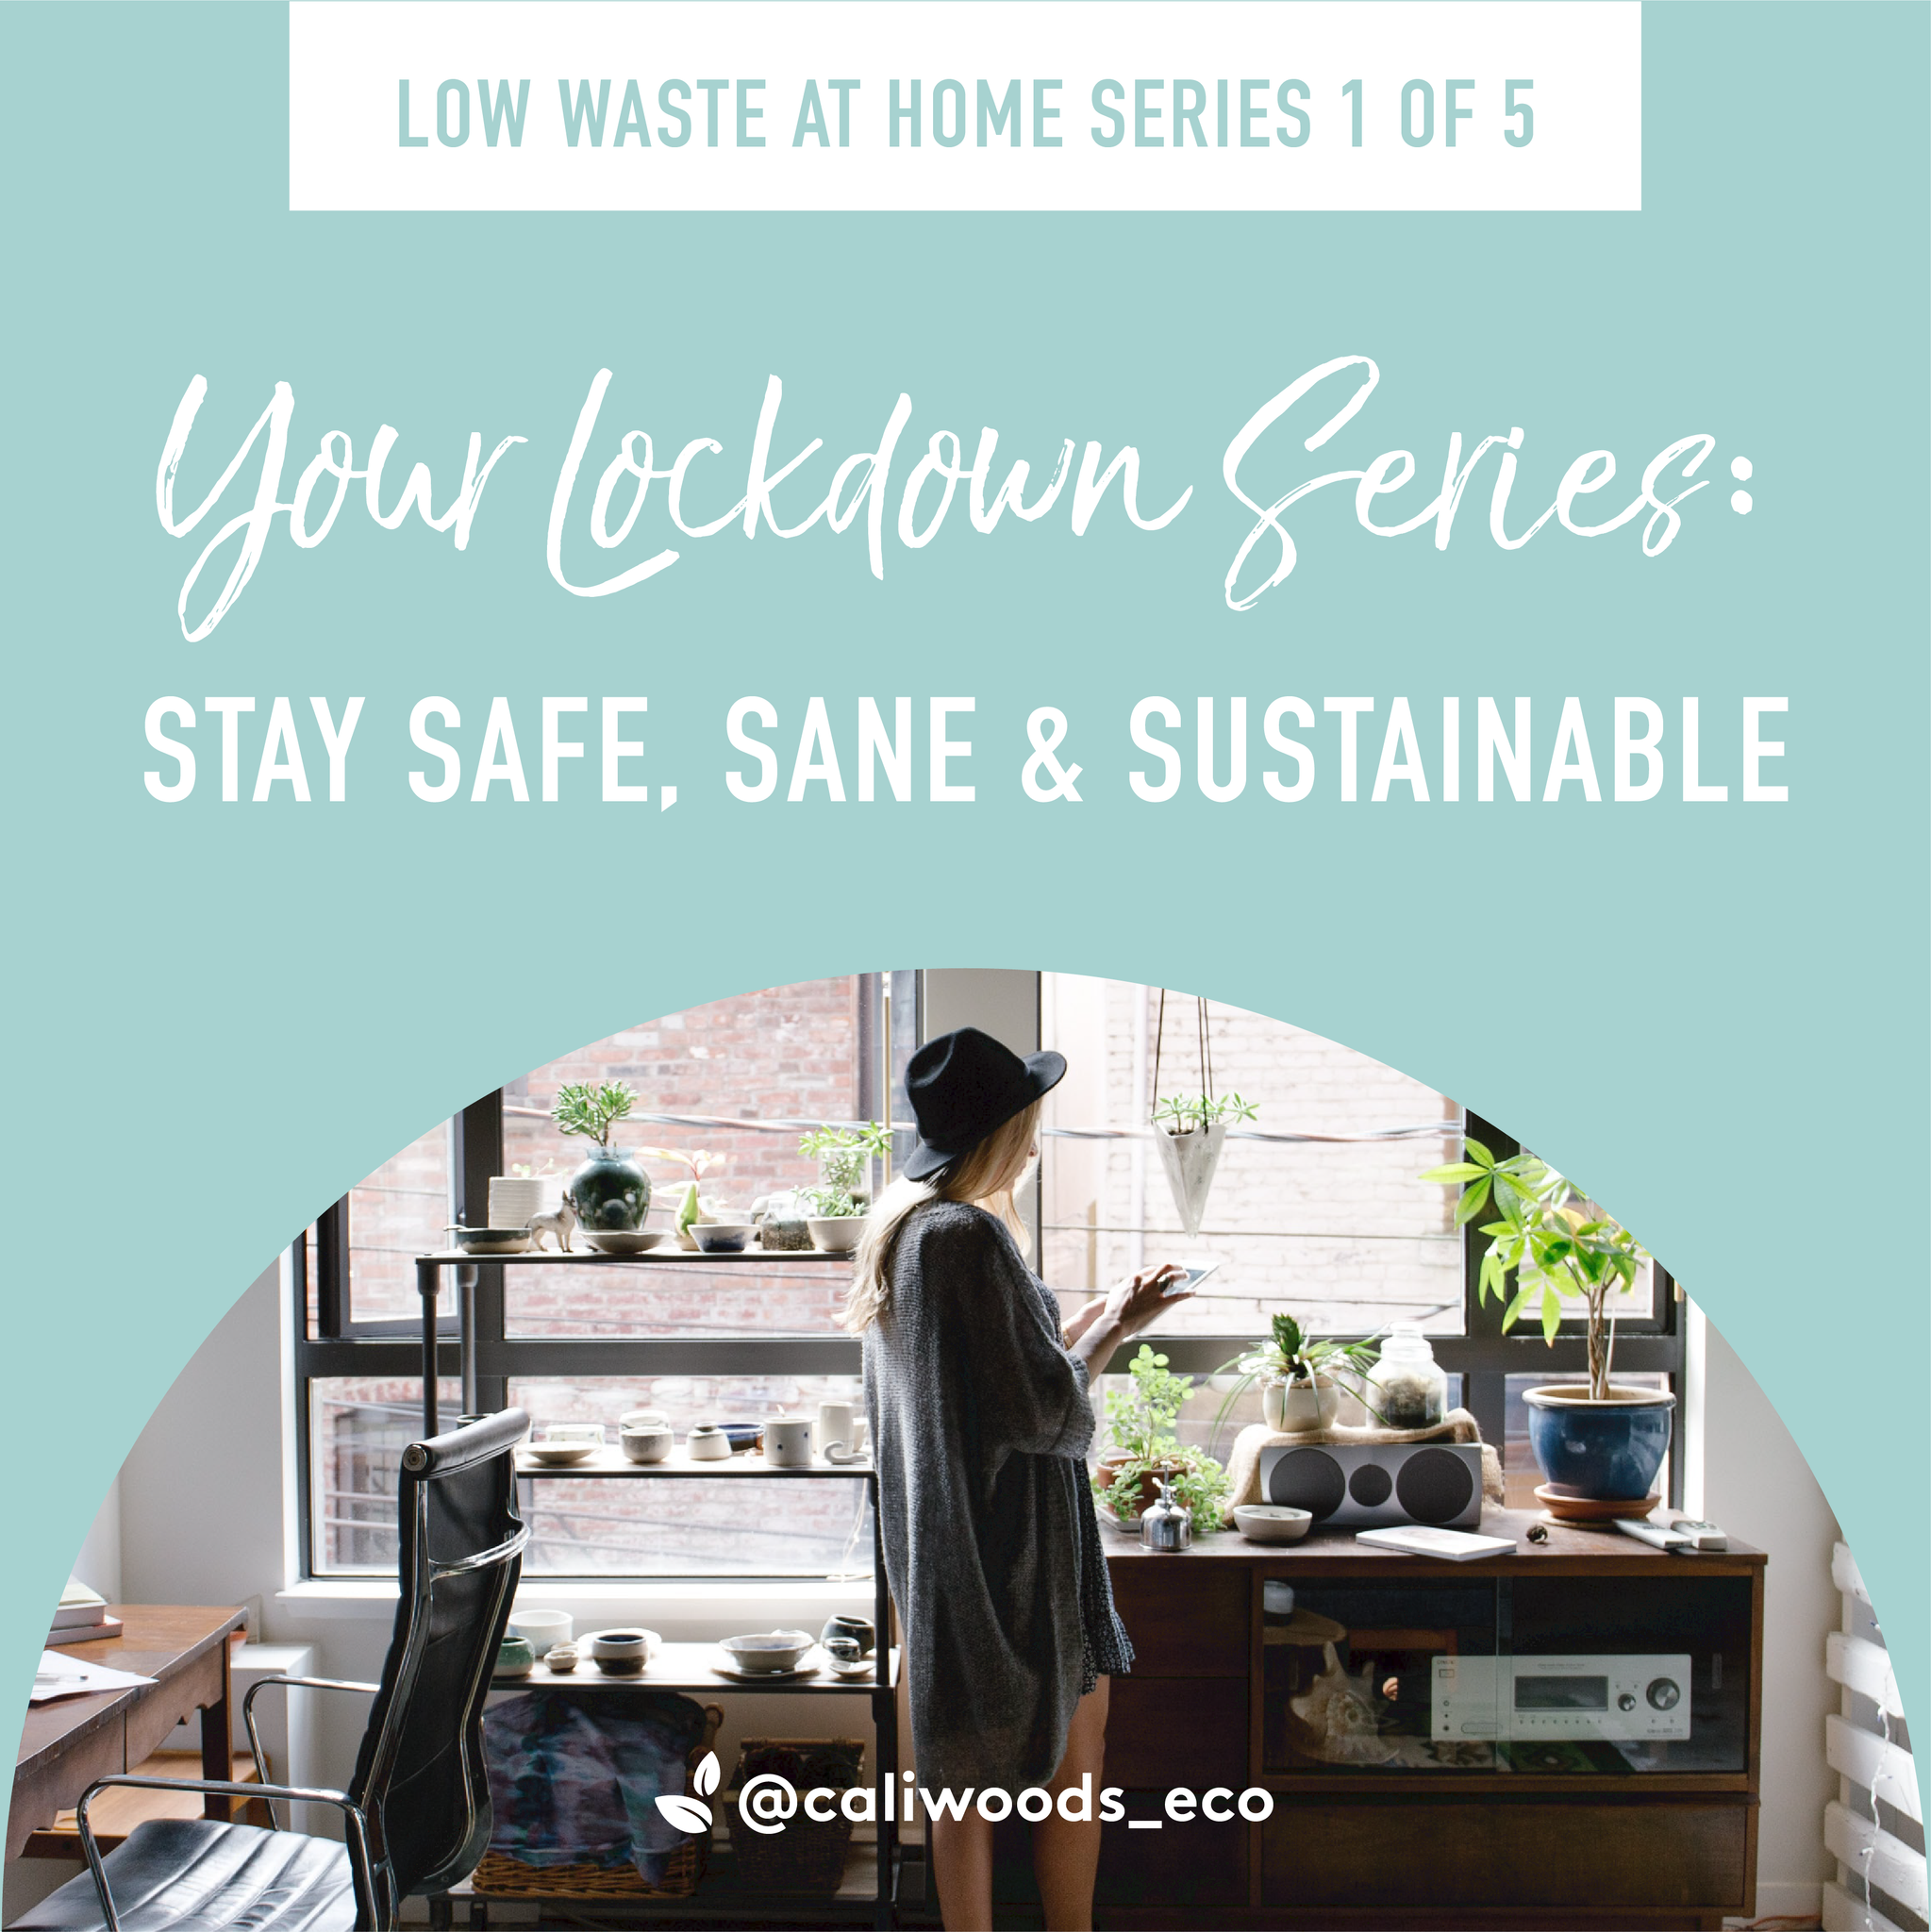 Eco Tips At Home While On Lockdown!